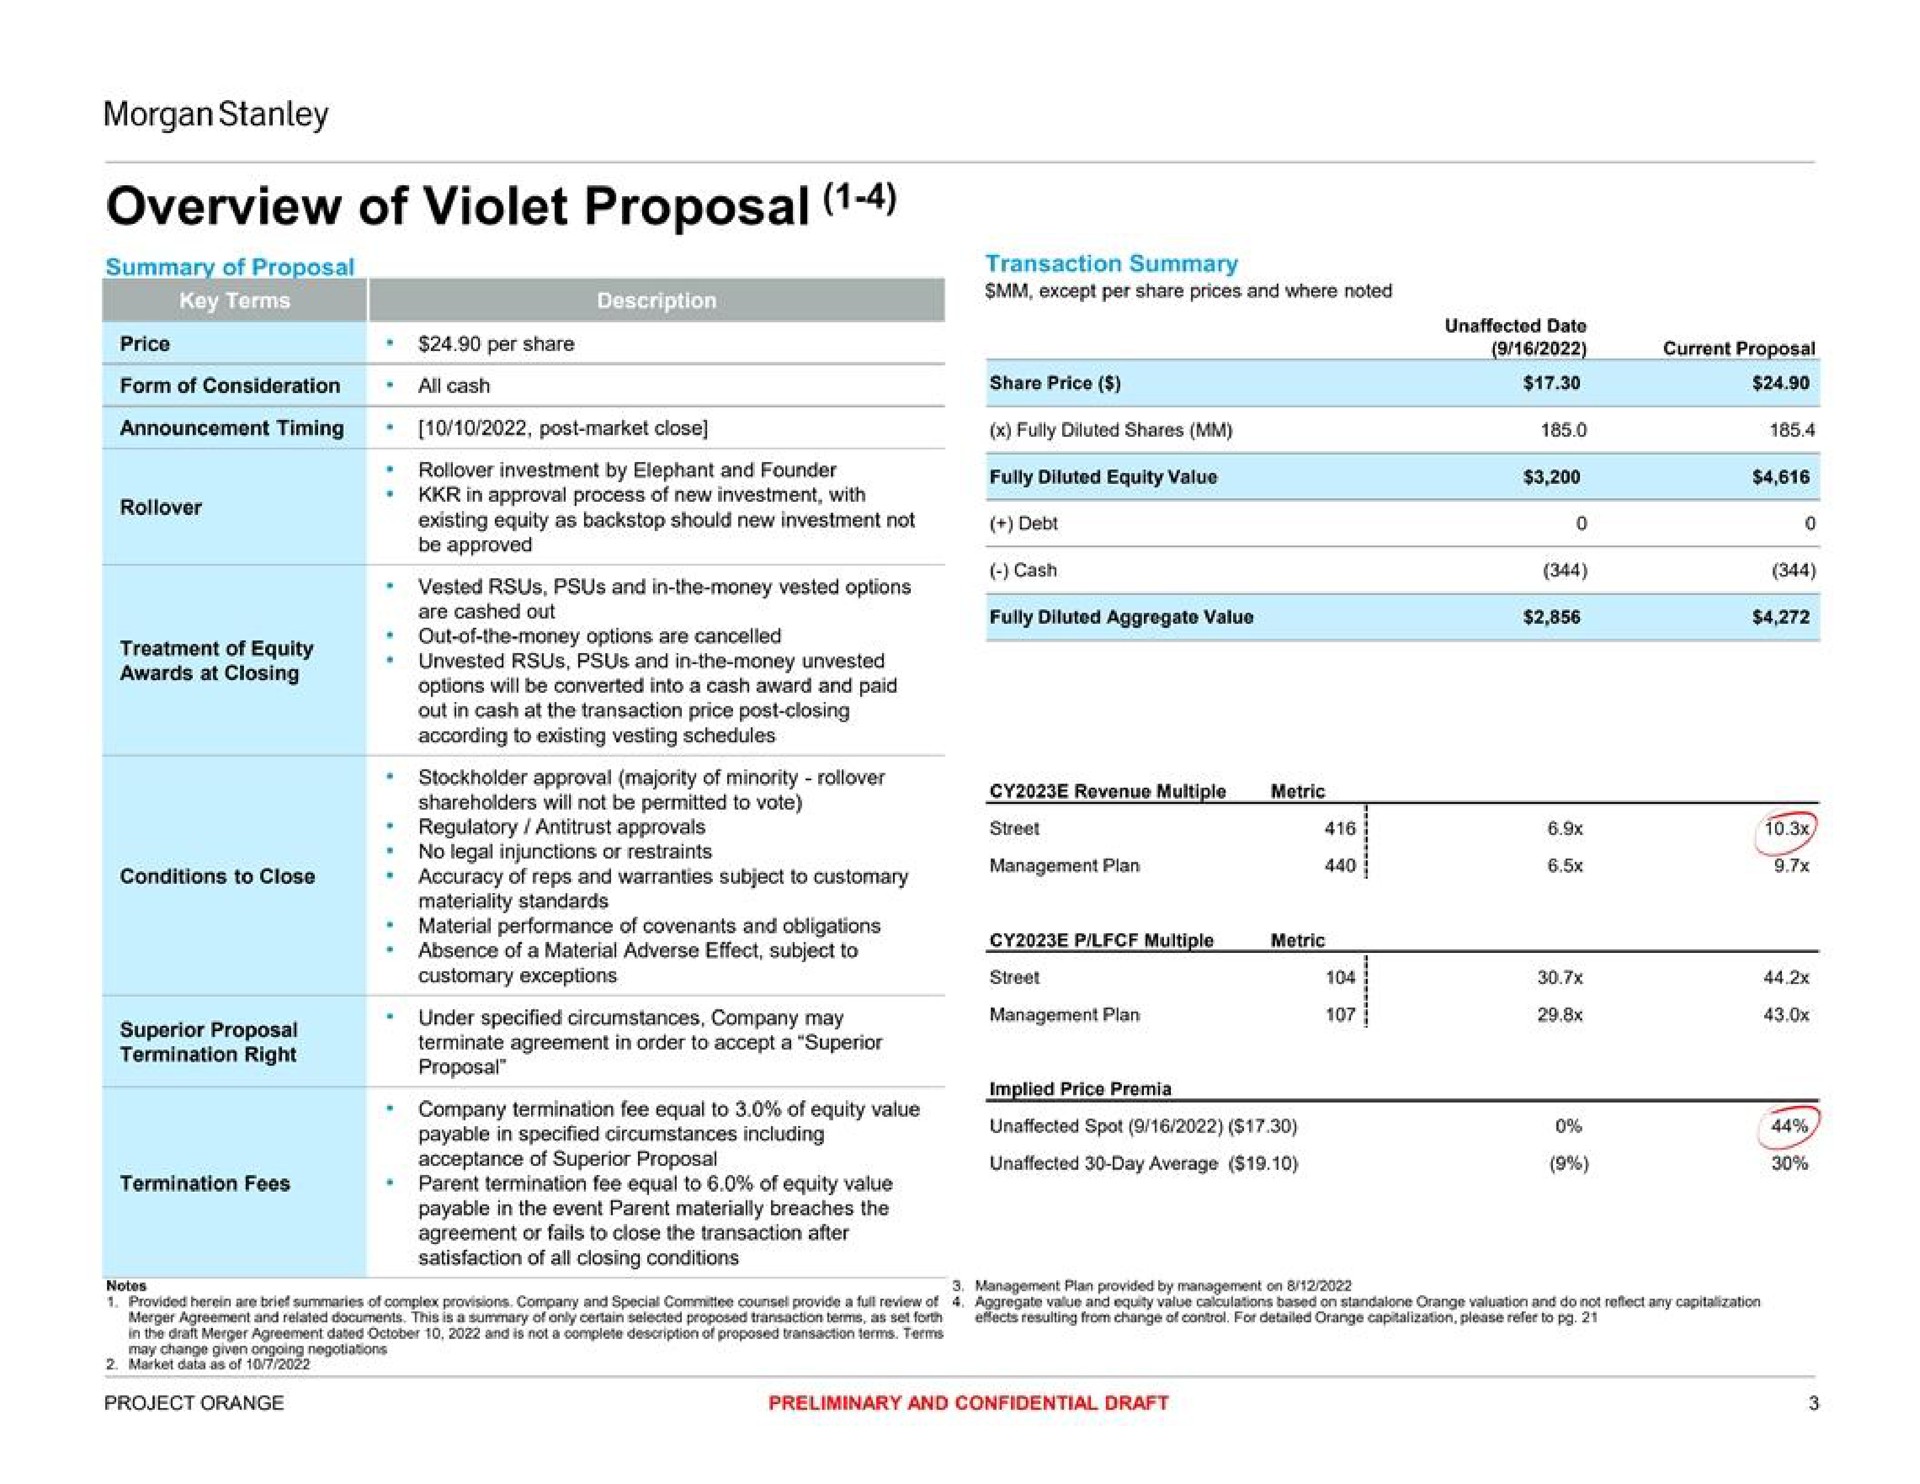 overview of violet proposal | Morgan Stanley